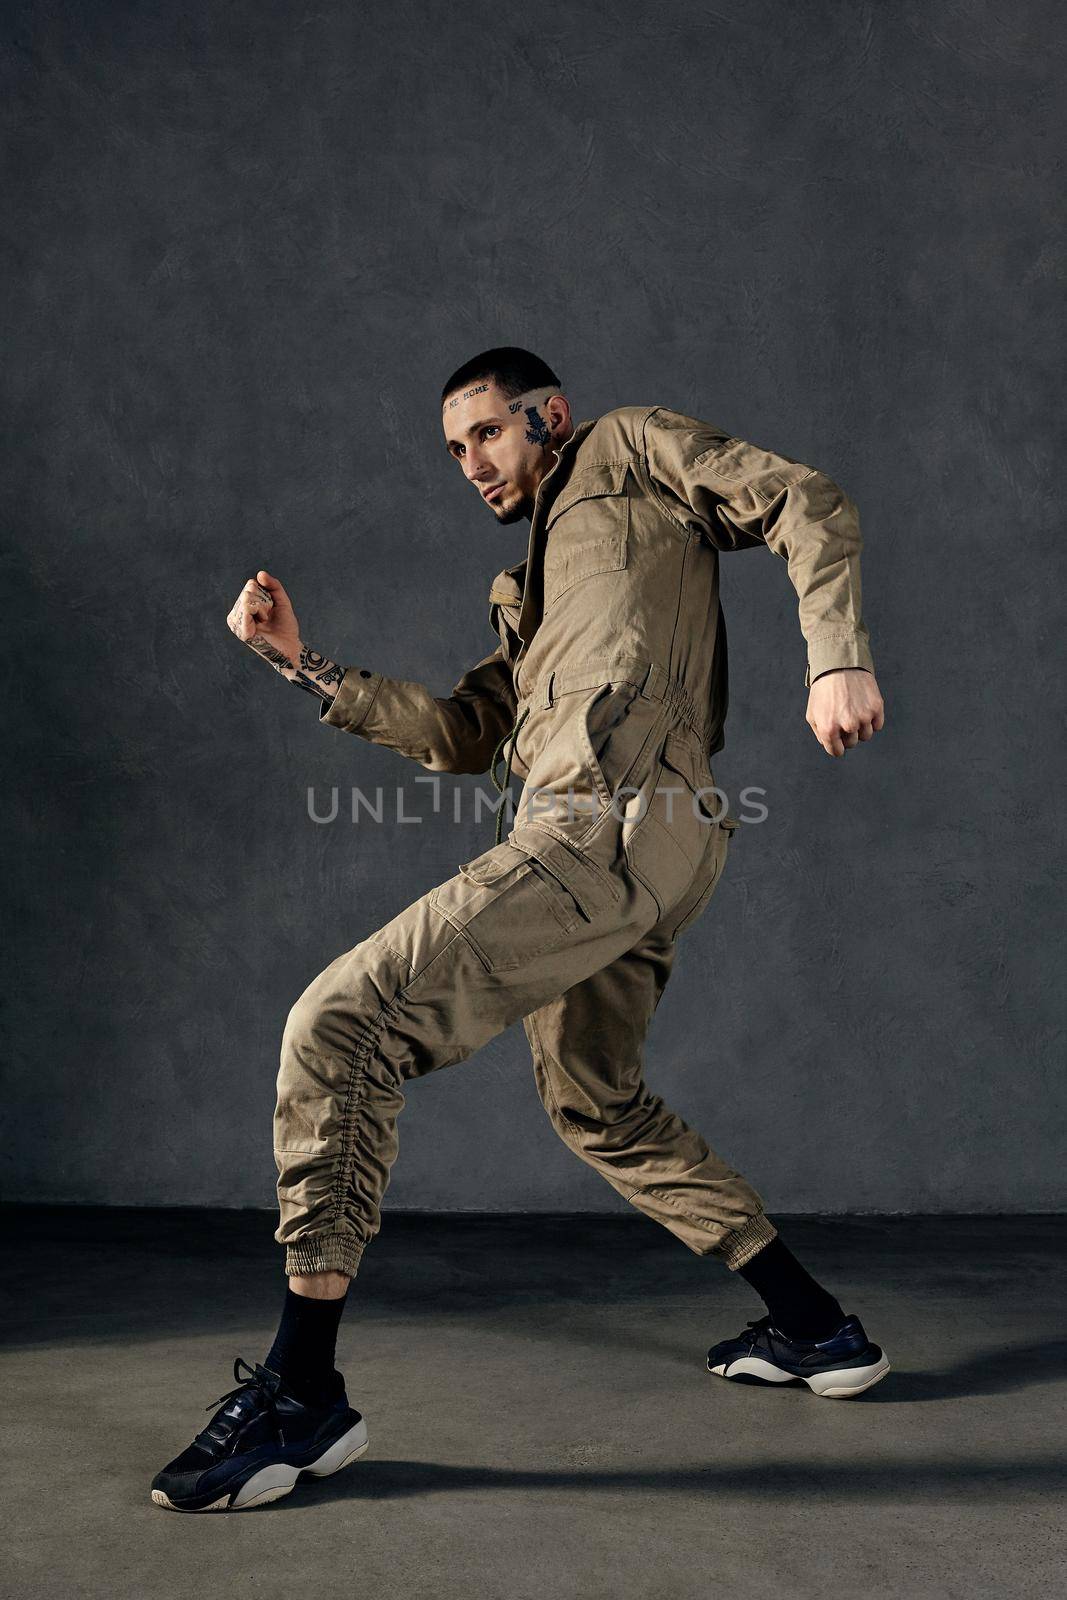 Good-looking man with tattooed body and face, earrings, beard. Dressed in khaki overalls and black sneakers. He is dancing against gray studio background. Dancehall, hip-hop. Full length, copy space